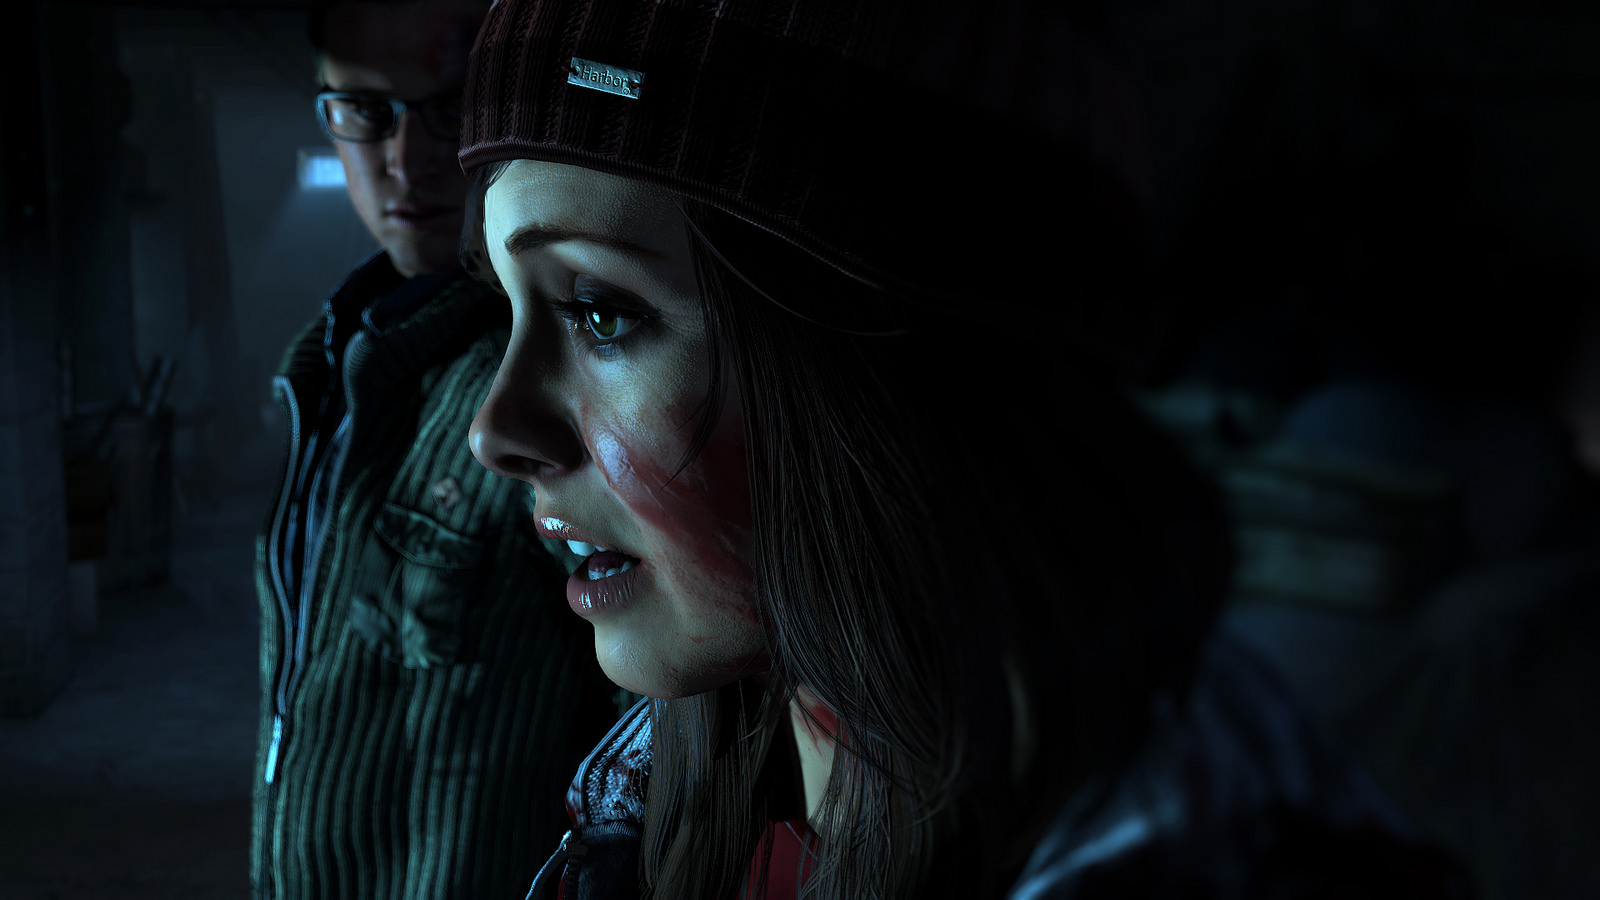 “Until Dawn” Has Valentine’s Day Trailer - On Friday the 13th- The Irony!